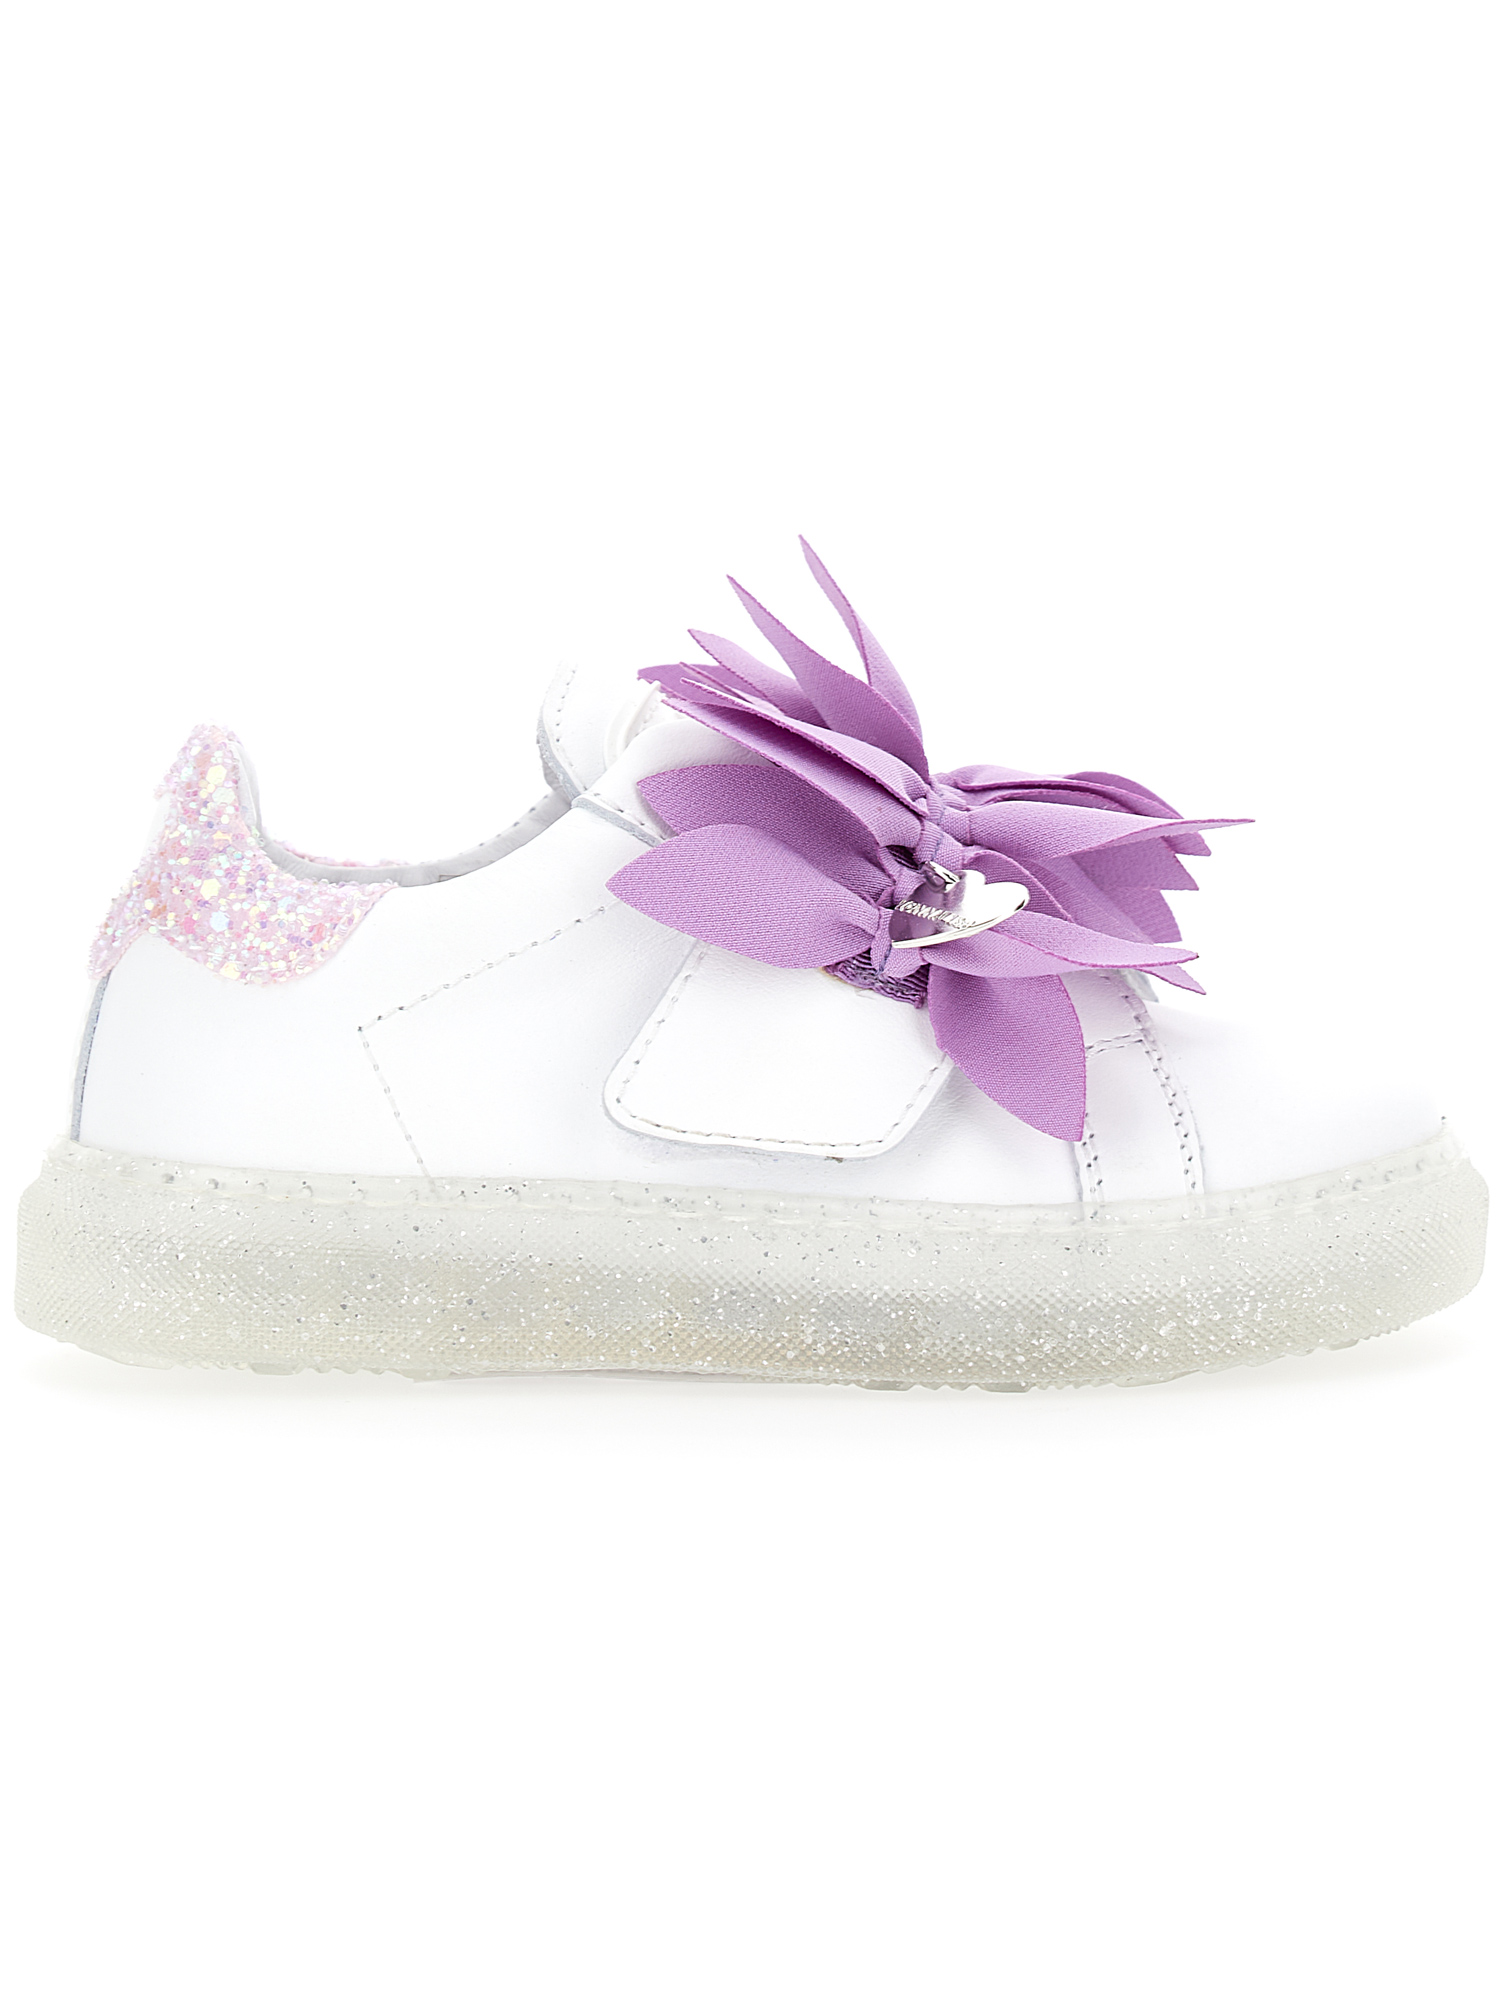 Monnalisa Leather Sneakers With Petals In Cream + Wisteria